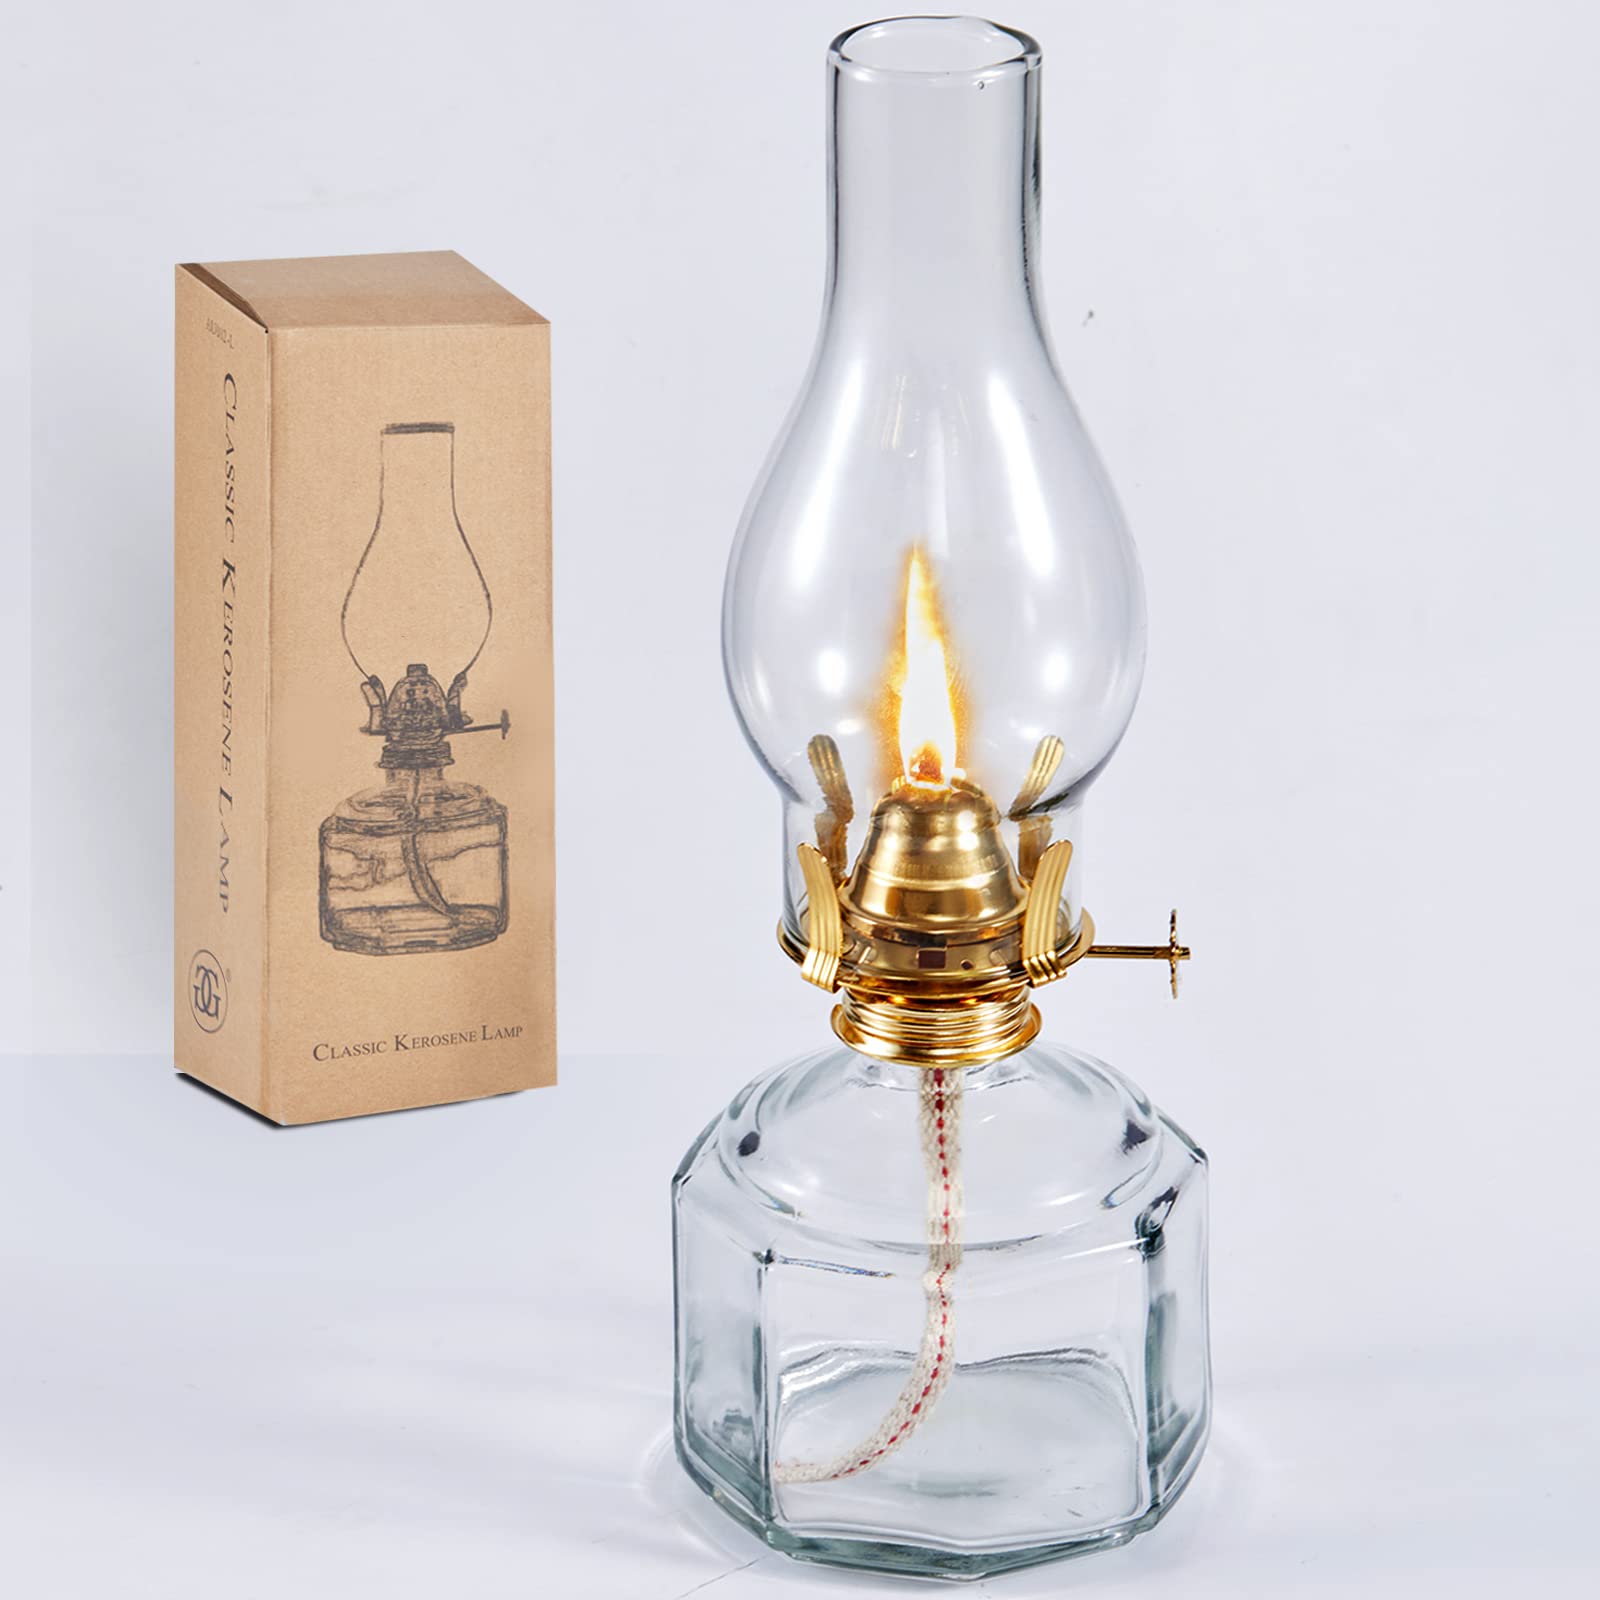 How Does An Oil Lamp Work